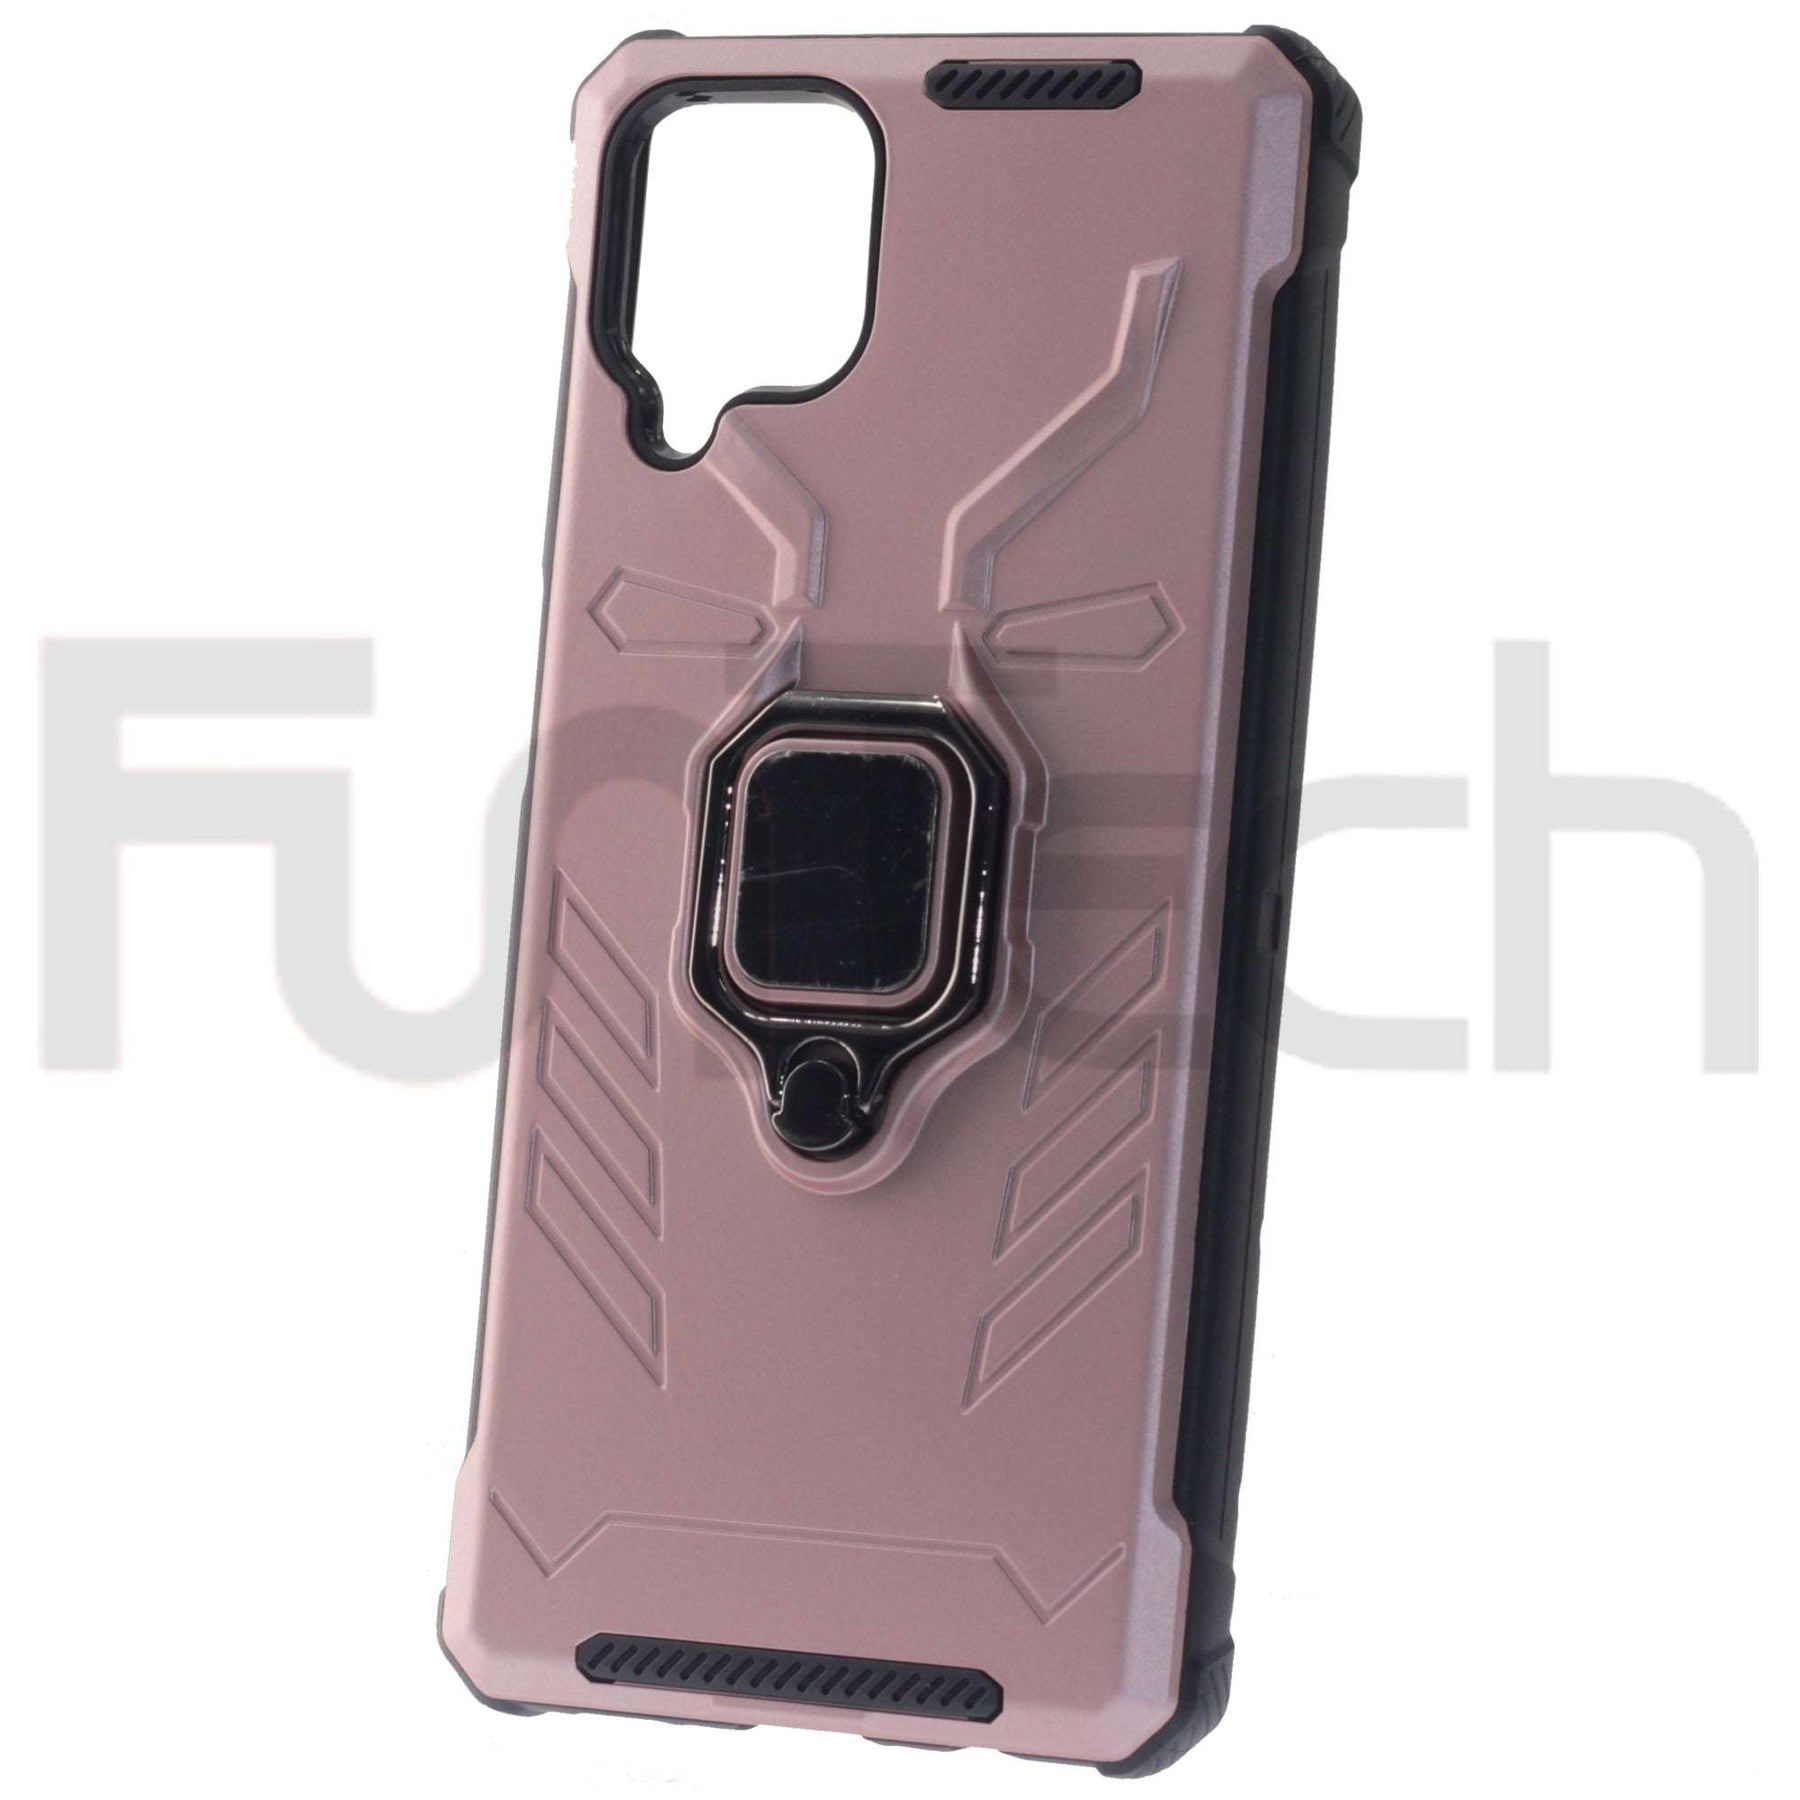 Ring Armor Case, Color Rose Gold.